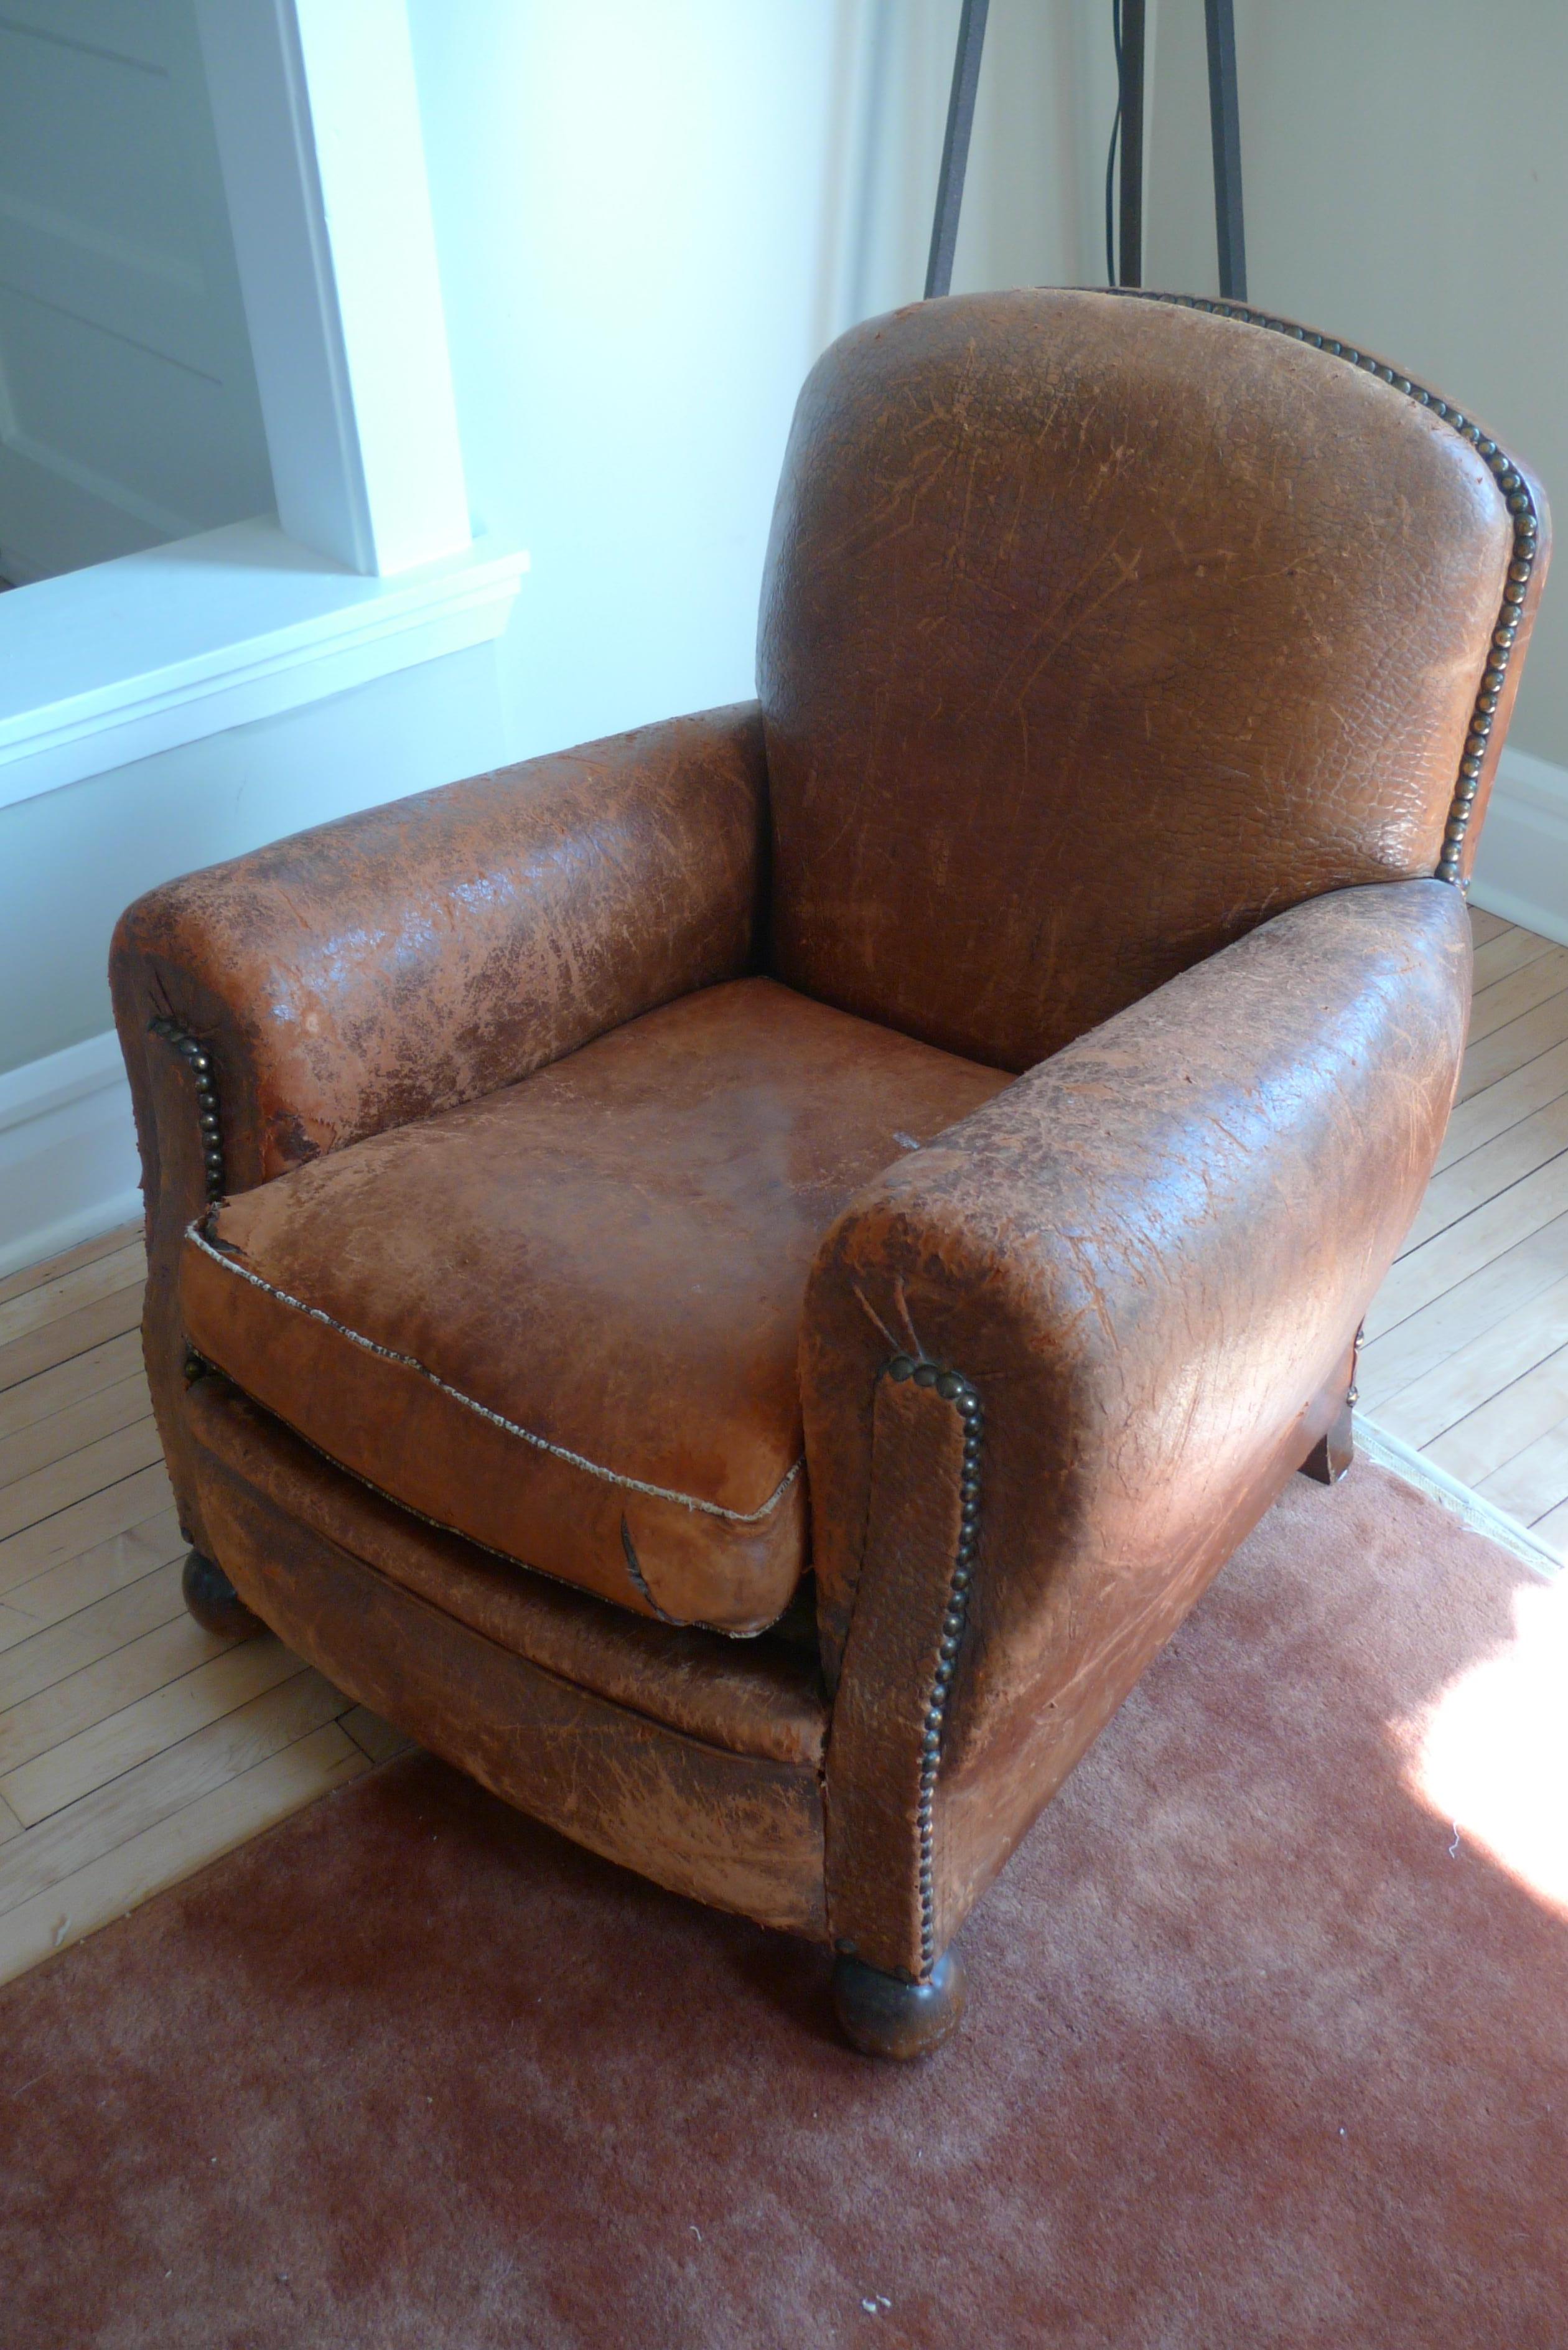 Club chair from Paris of alligatored leather, circa 1930s. All original material including the cushion stuffing and springs in the frame. Wonderful leather patina that only use and age can impart. With the feel and texture of a life well lived with